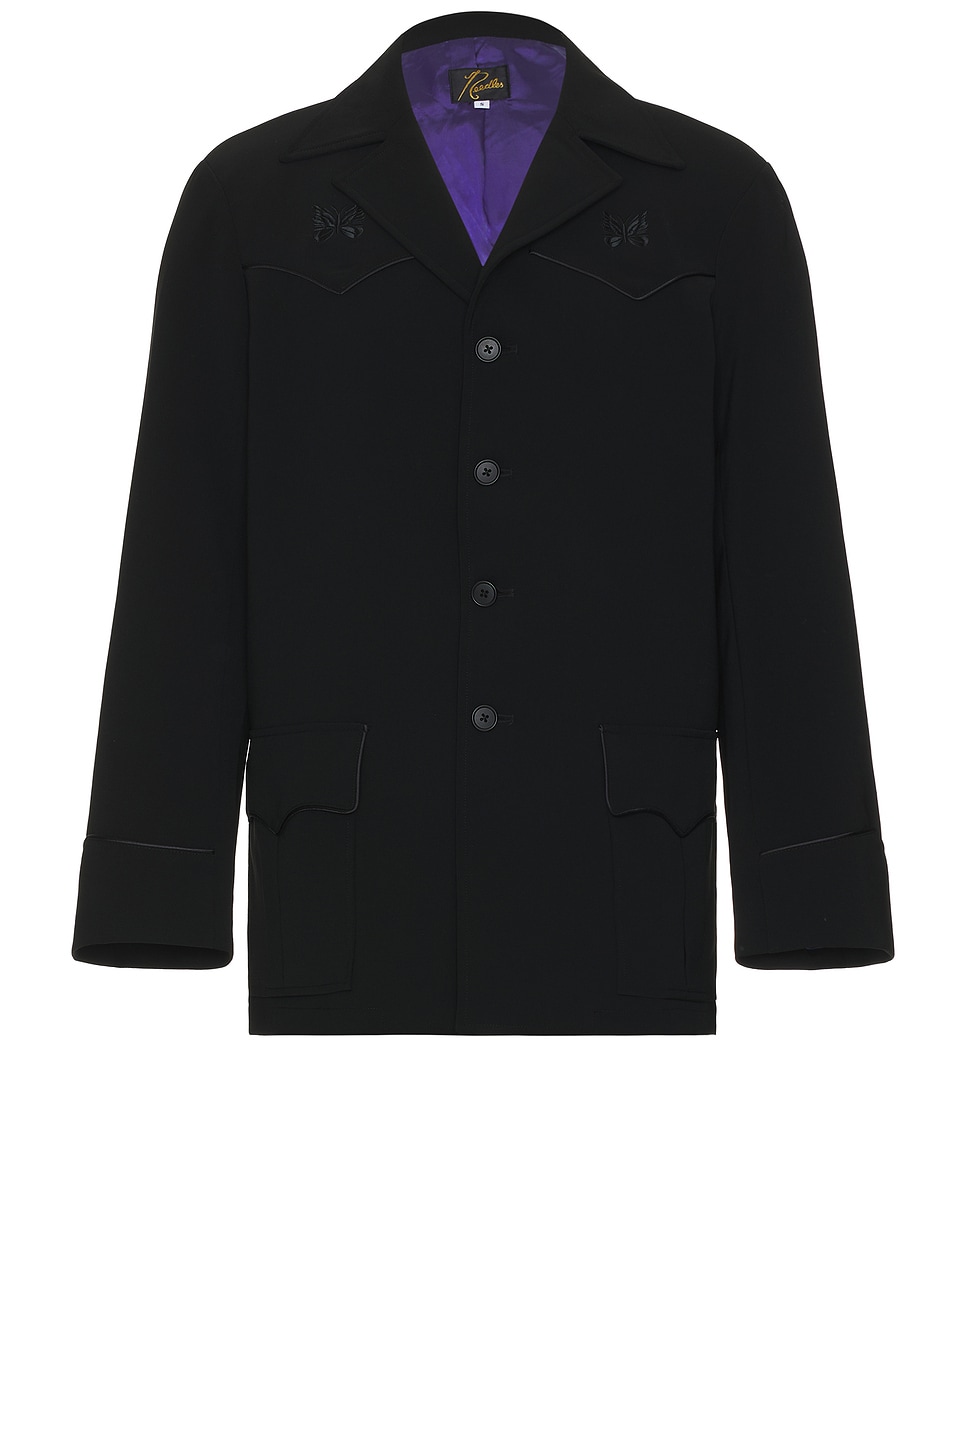 Image 1 of Needles Western Leisure Jacket Double Cloth In Black in Black